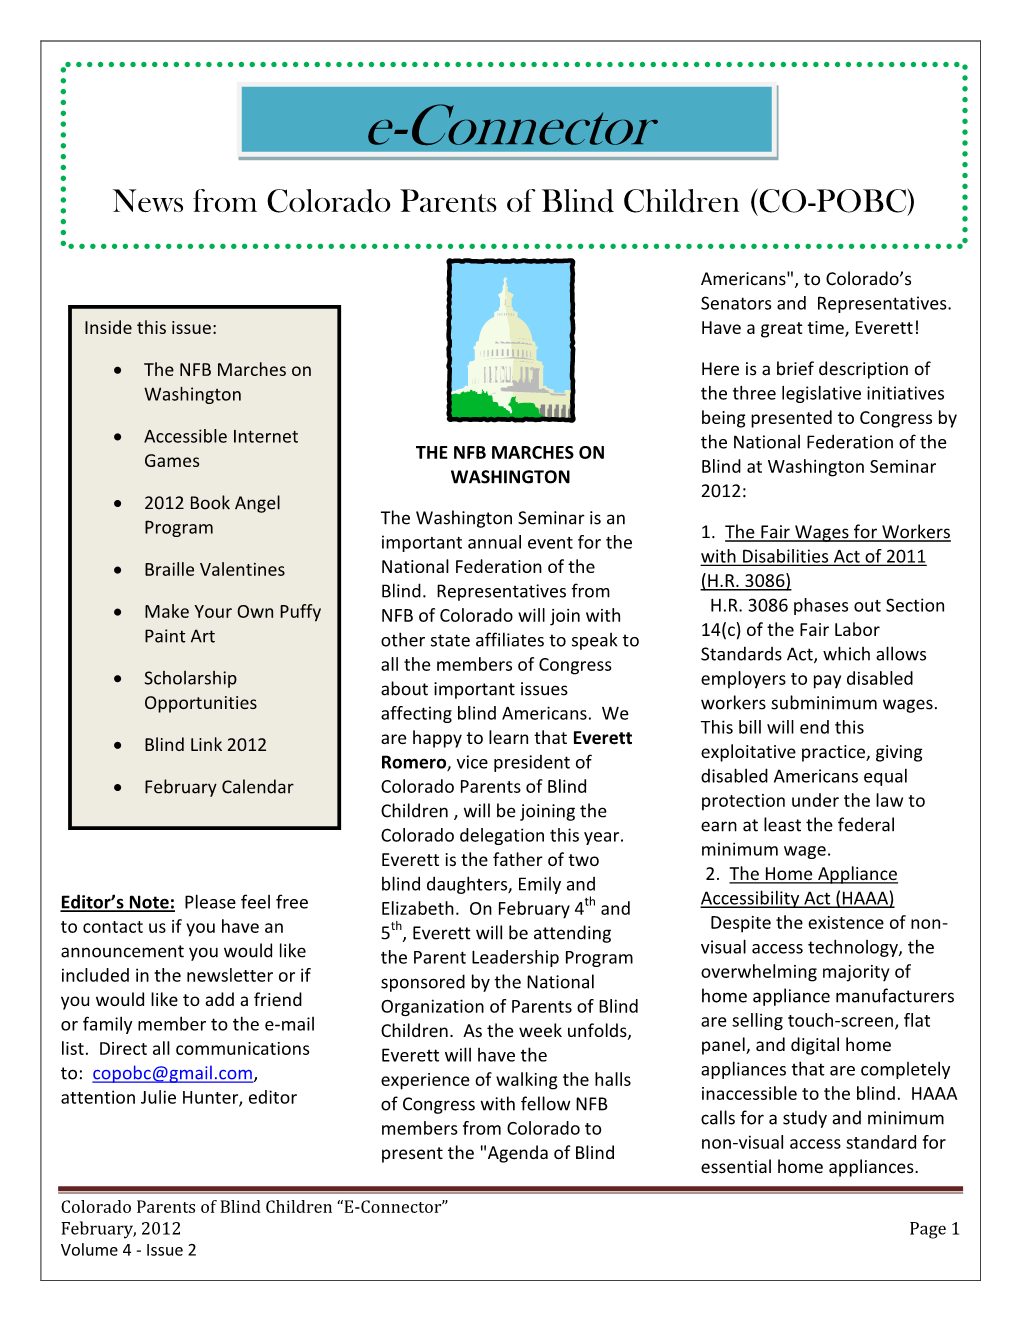 The E-Connector: News from the Colorado Parents of Blind Children